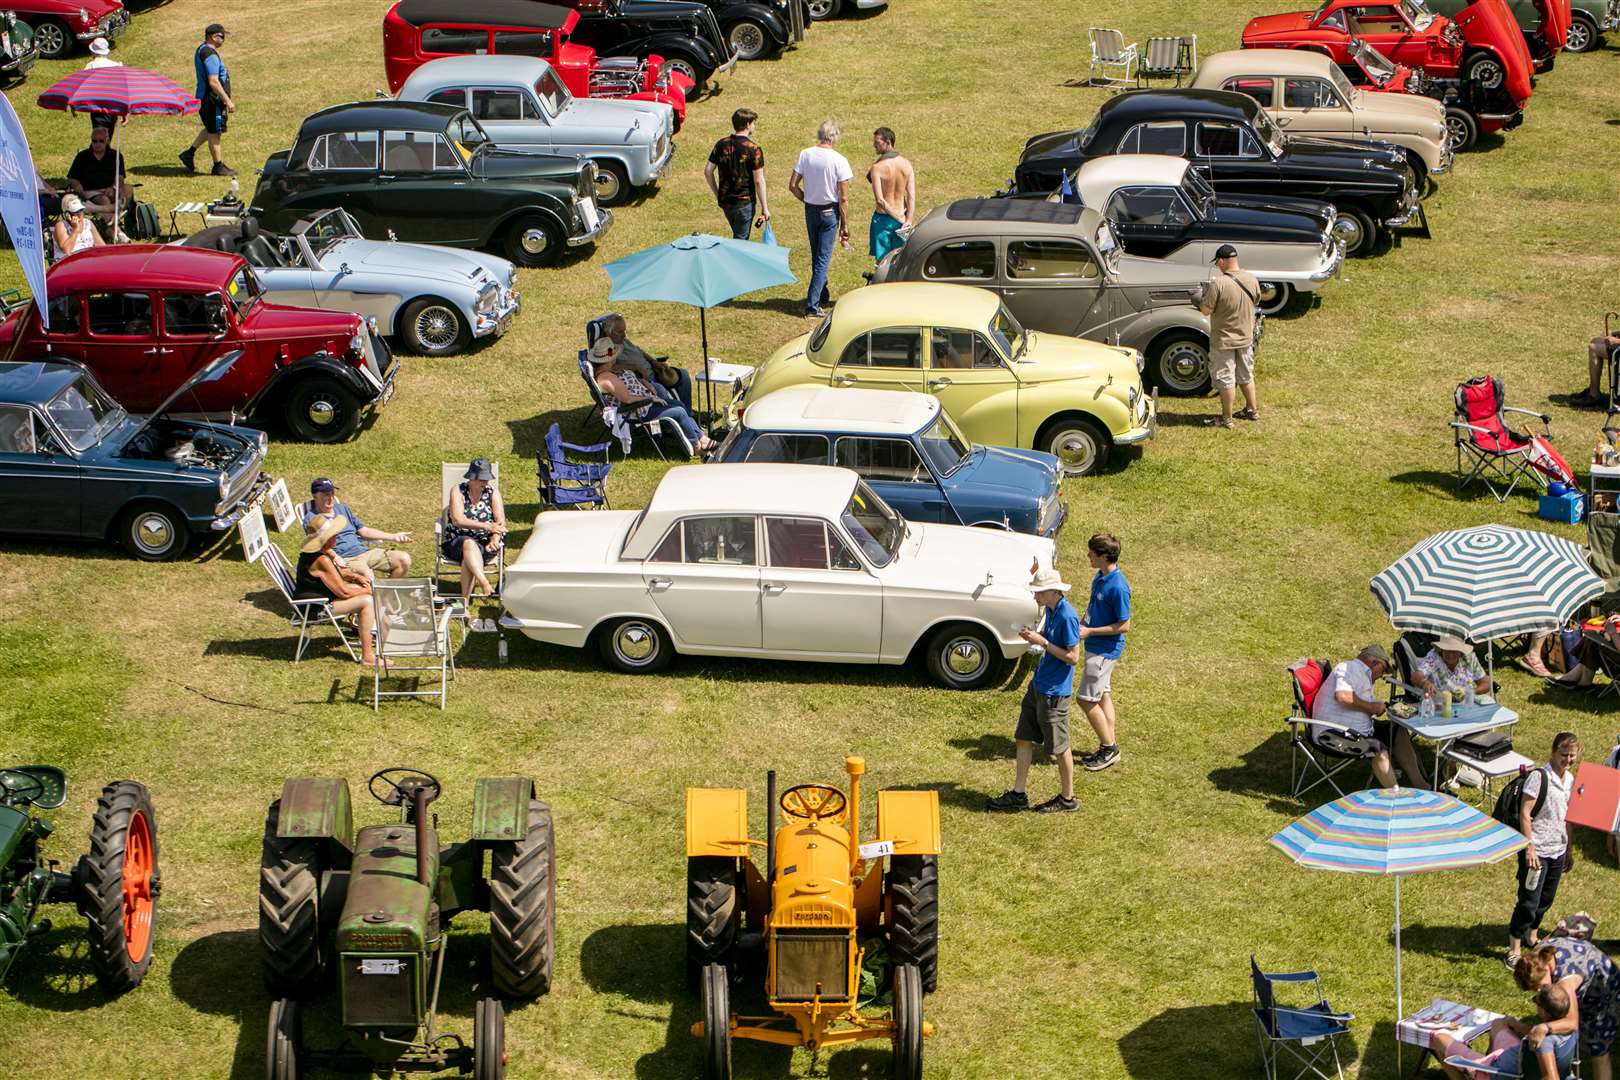 Browse vintage vehicles at the show's outdoor classic car show. Picture: Thomas Alexander